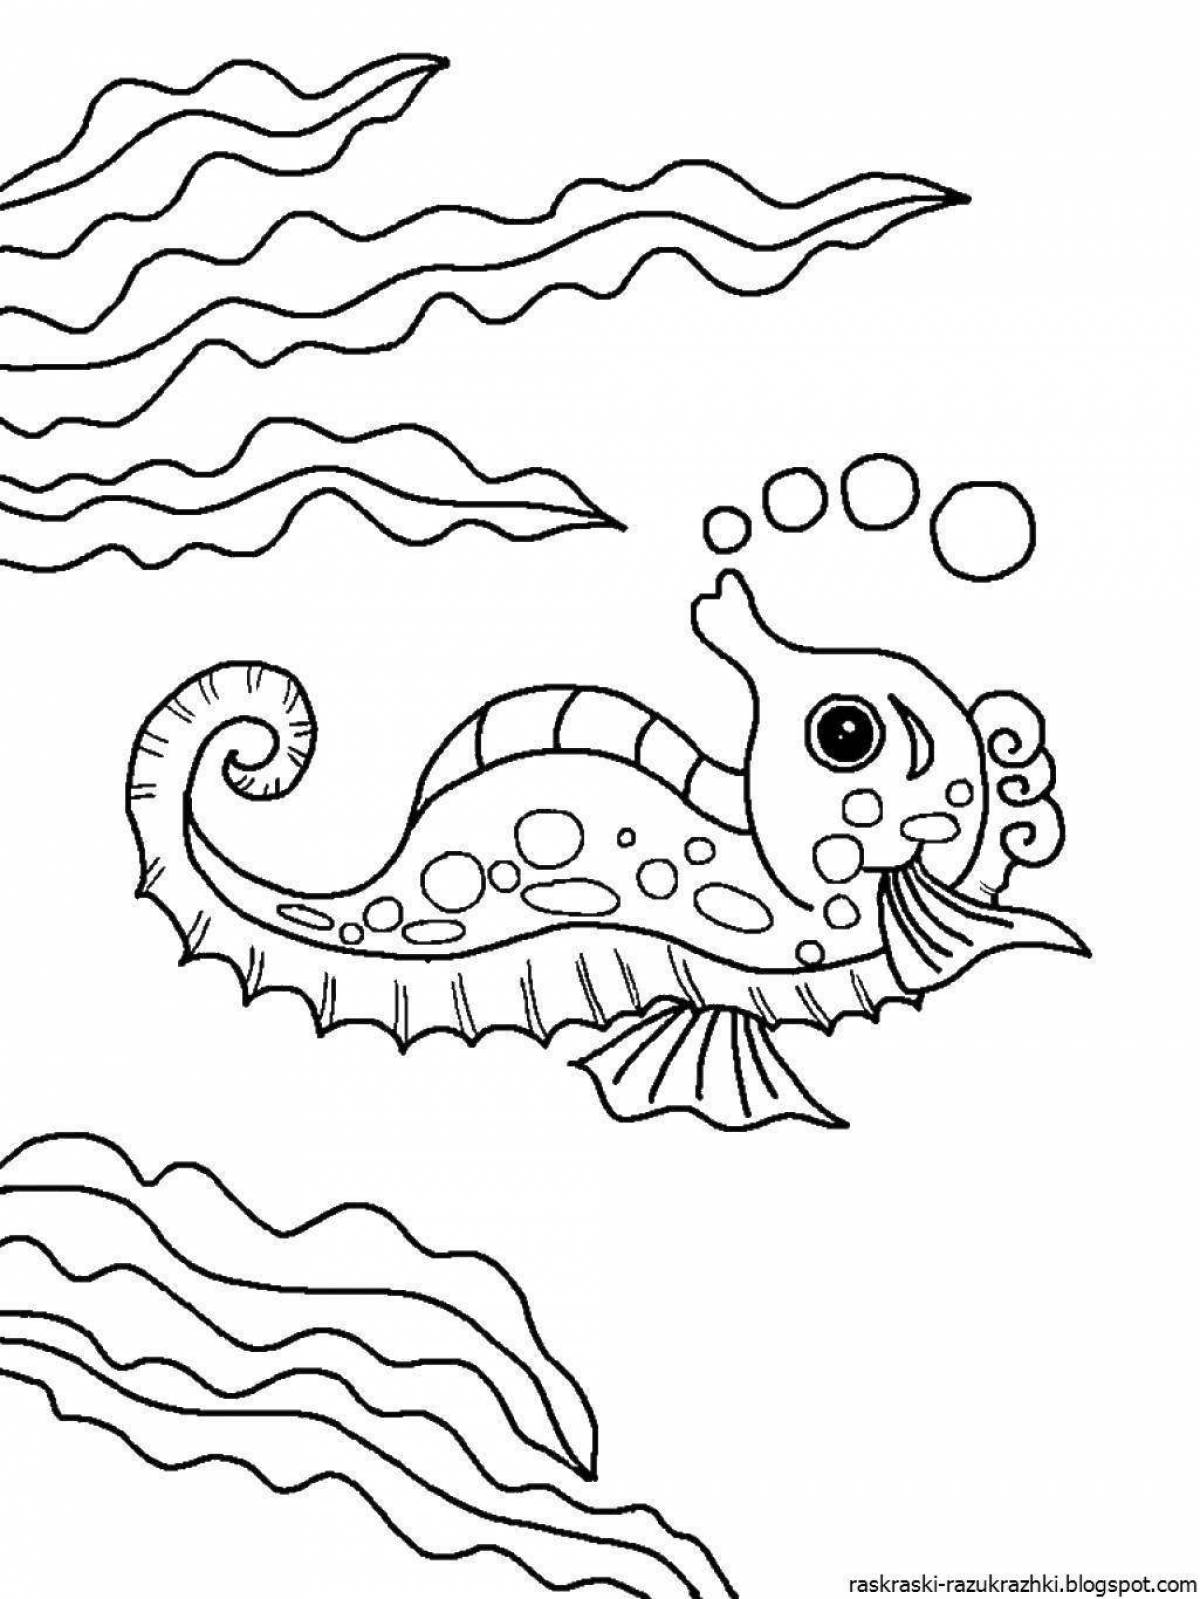 A fun marine life coloring book for 4-5 year olds